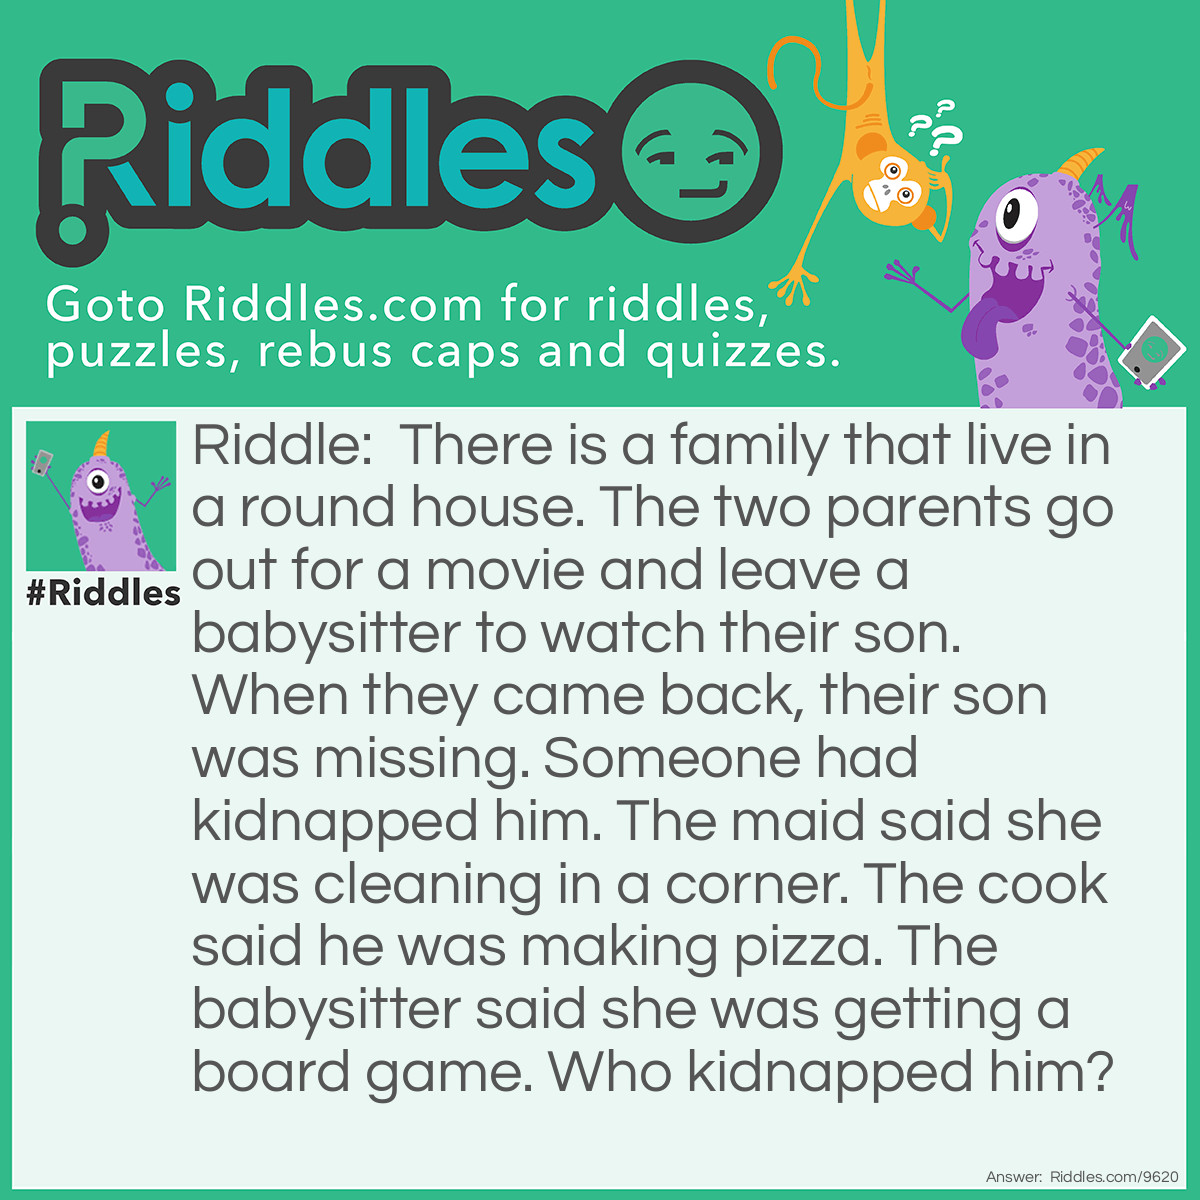 Riddle: There is a family that live in a round house. The two parents go out for a movie and leave a babysitter to watch their son. When they came back, their son was missing. Someone had kidnapped him. The maid said she was cleaning in a corner. The cook said he was making pizza. The babysitter said she was getting a board game. Who kidnapped him? Answer: The maid! It is a round house, so there isn't any corner!